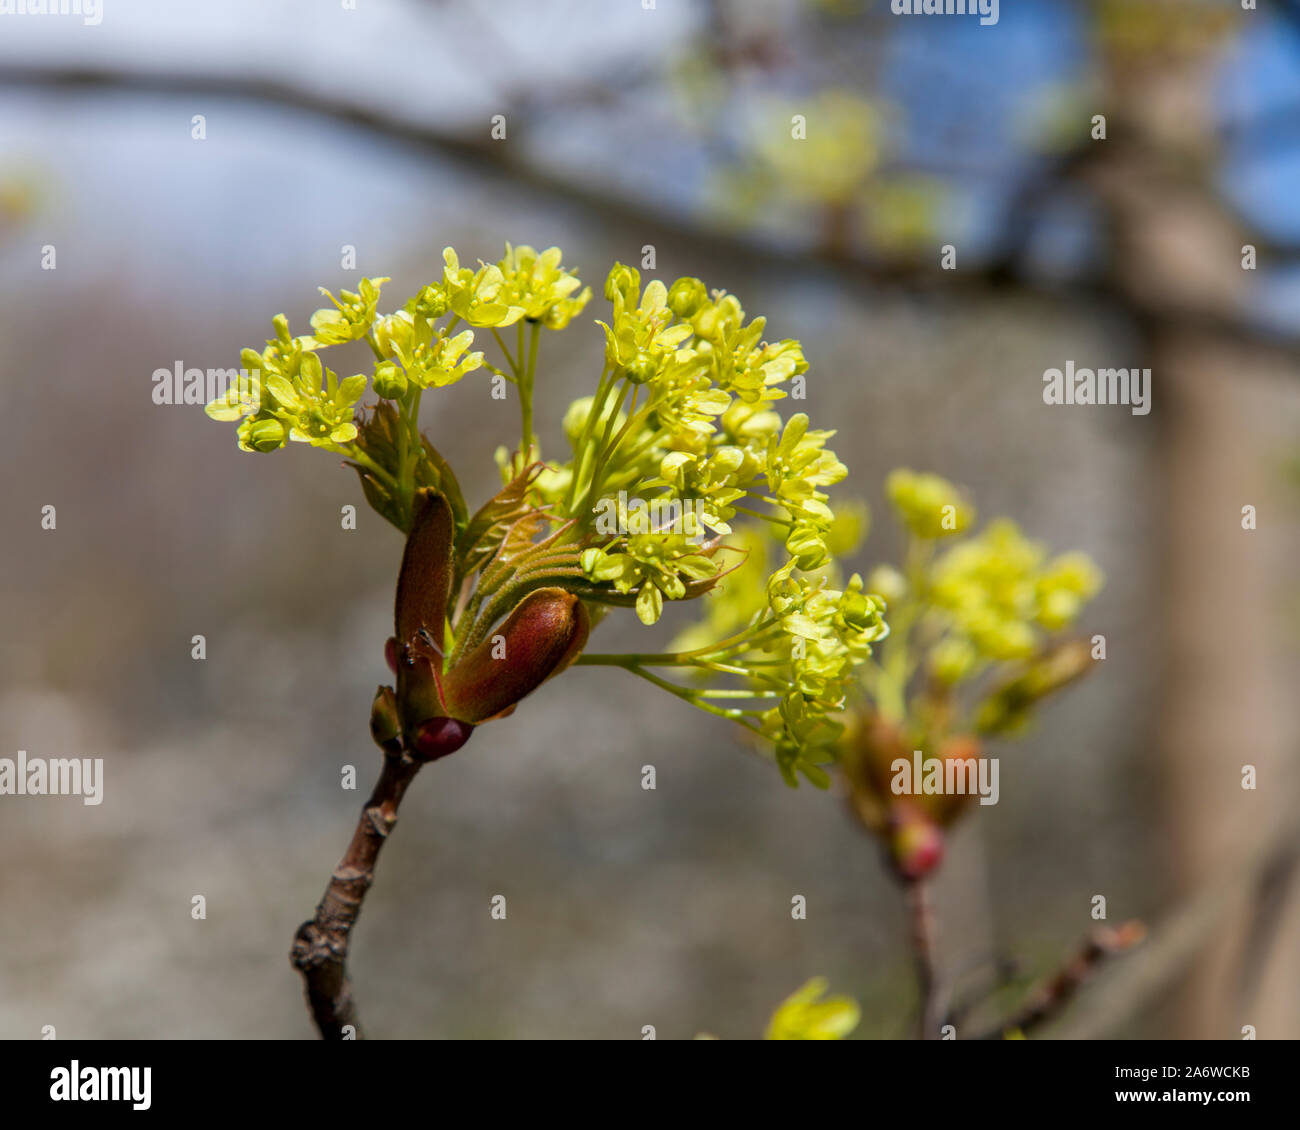 Flowers of Norway maple (acer platanoides) on an urban tree, London Stock Photo